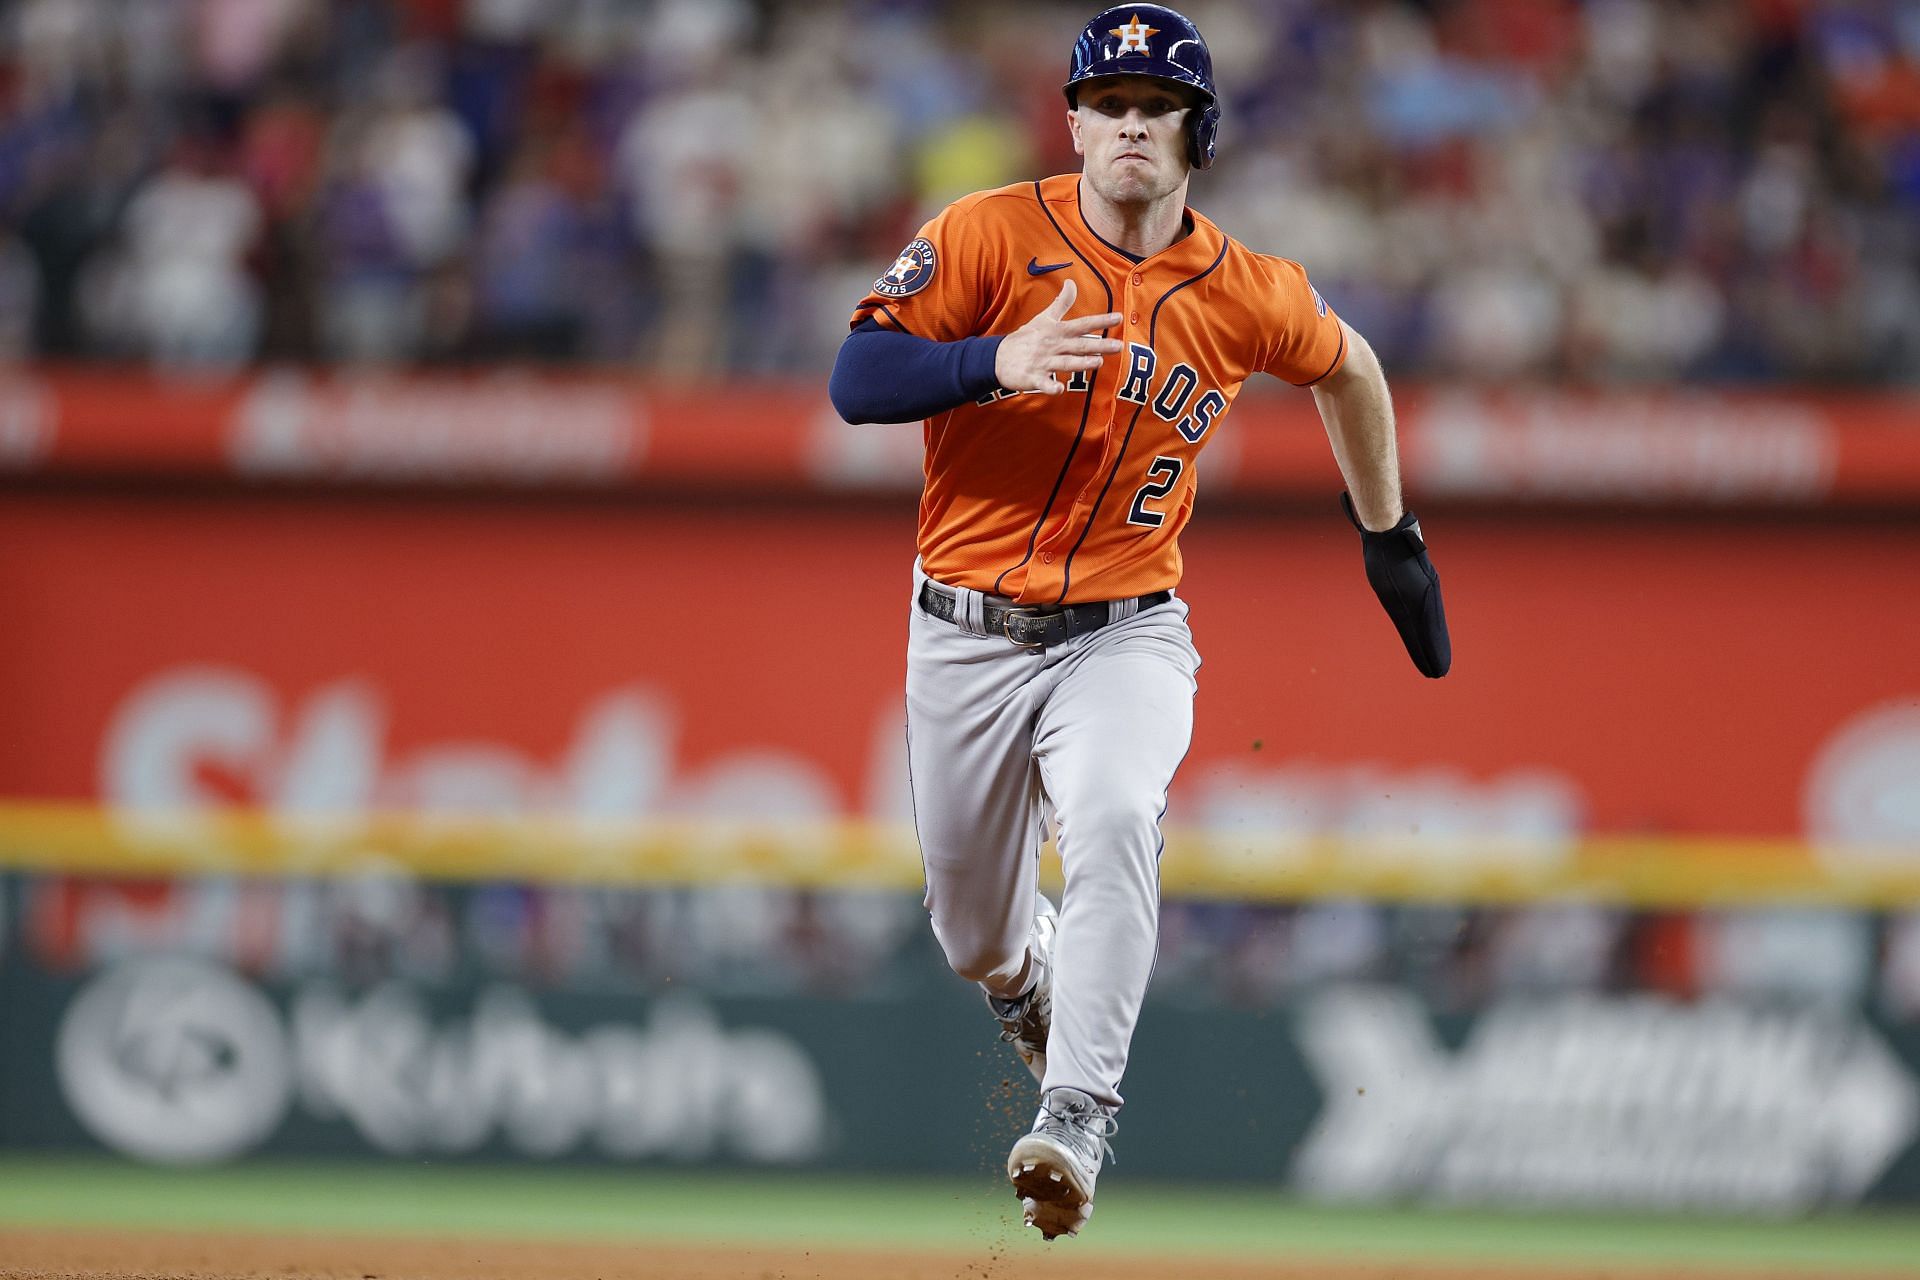 According to reports, Alex Bregman has been linked with the Yankees and Dodgers in a possible trade from the Houston Astros.